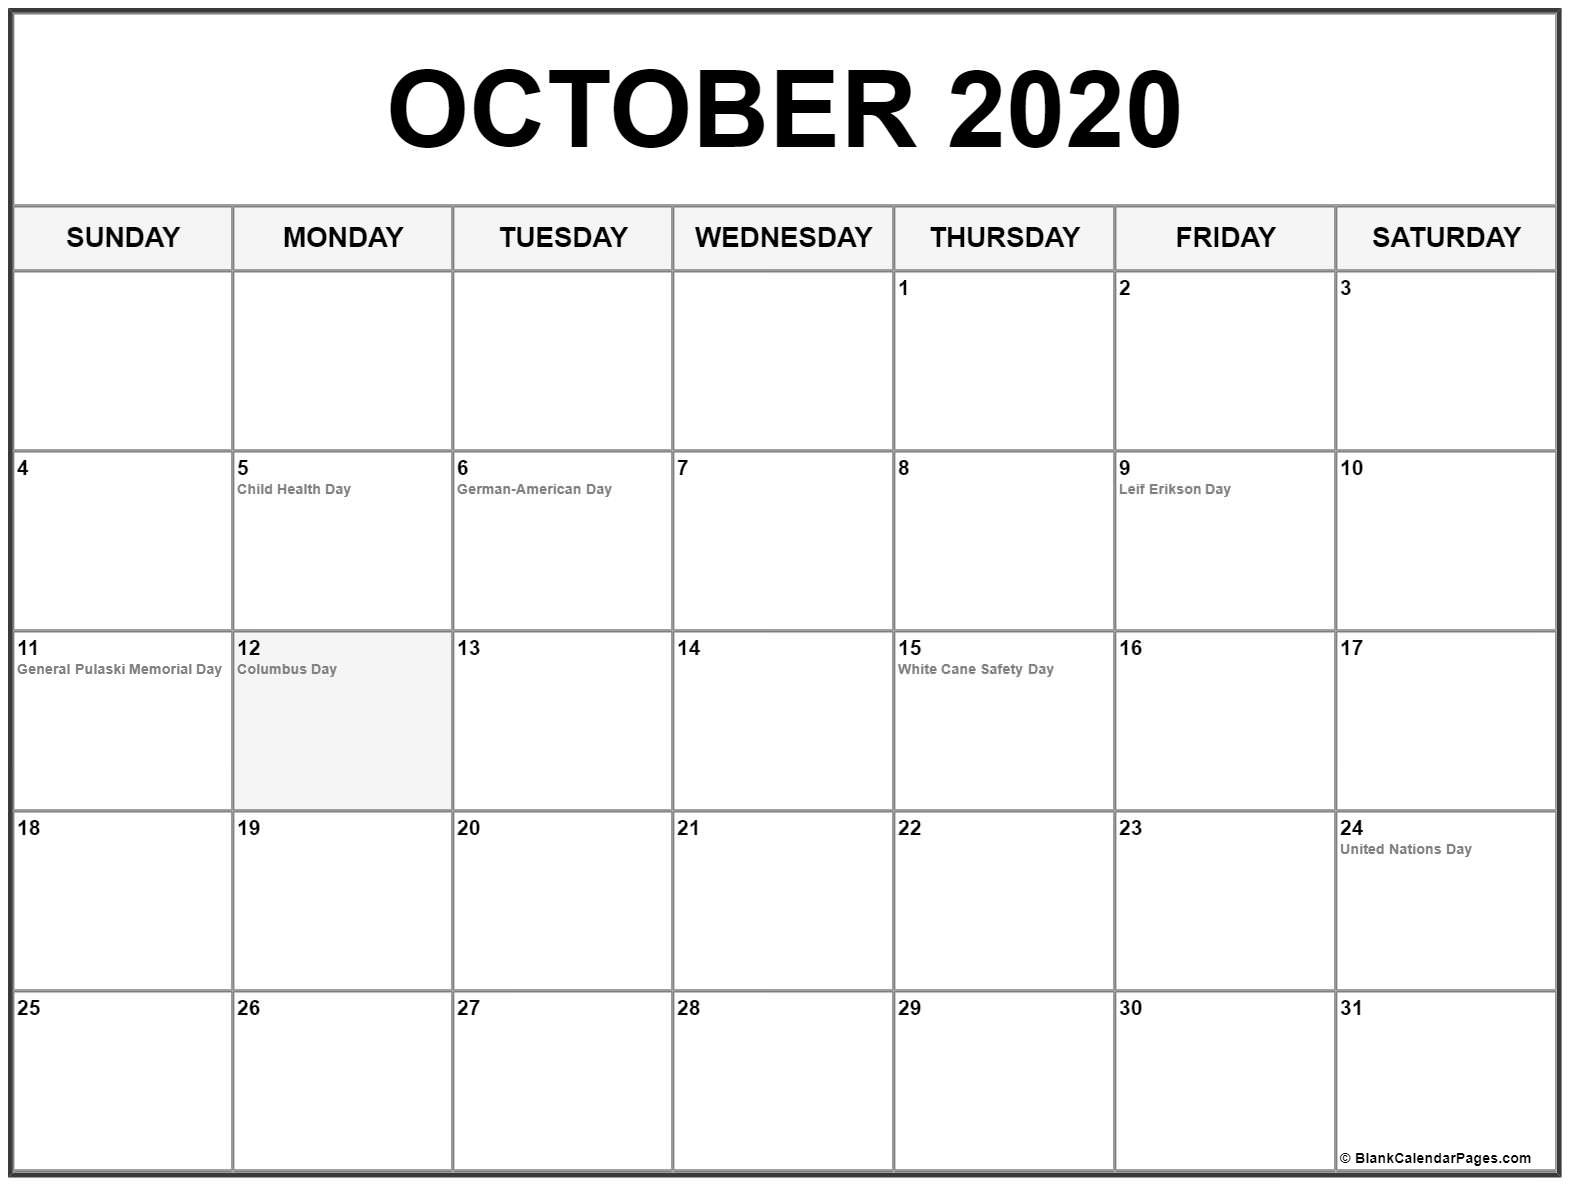 Collection of October 2020 calendars with holidays